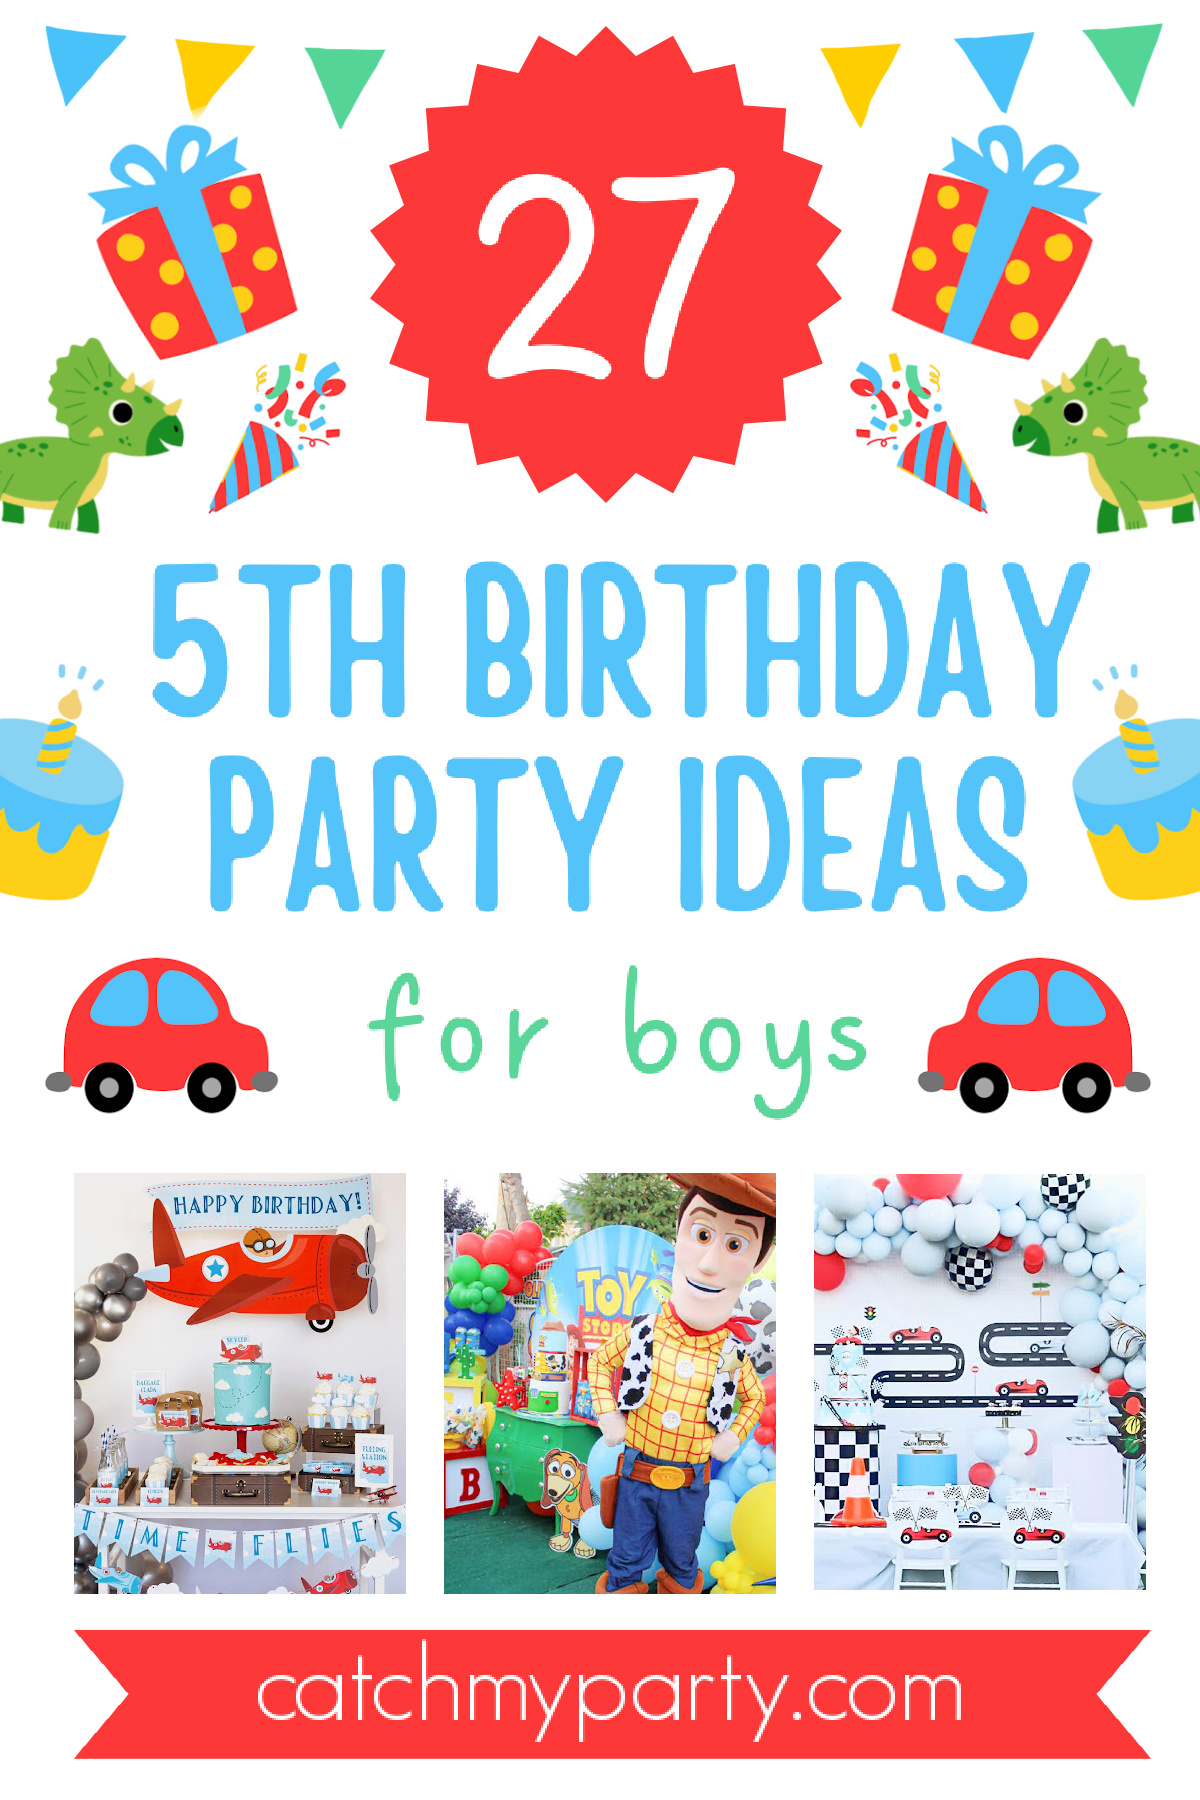 27 Fun and Creative 5th Birthday Party Ideas For Boys!